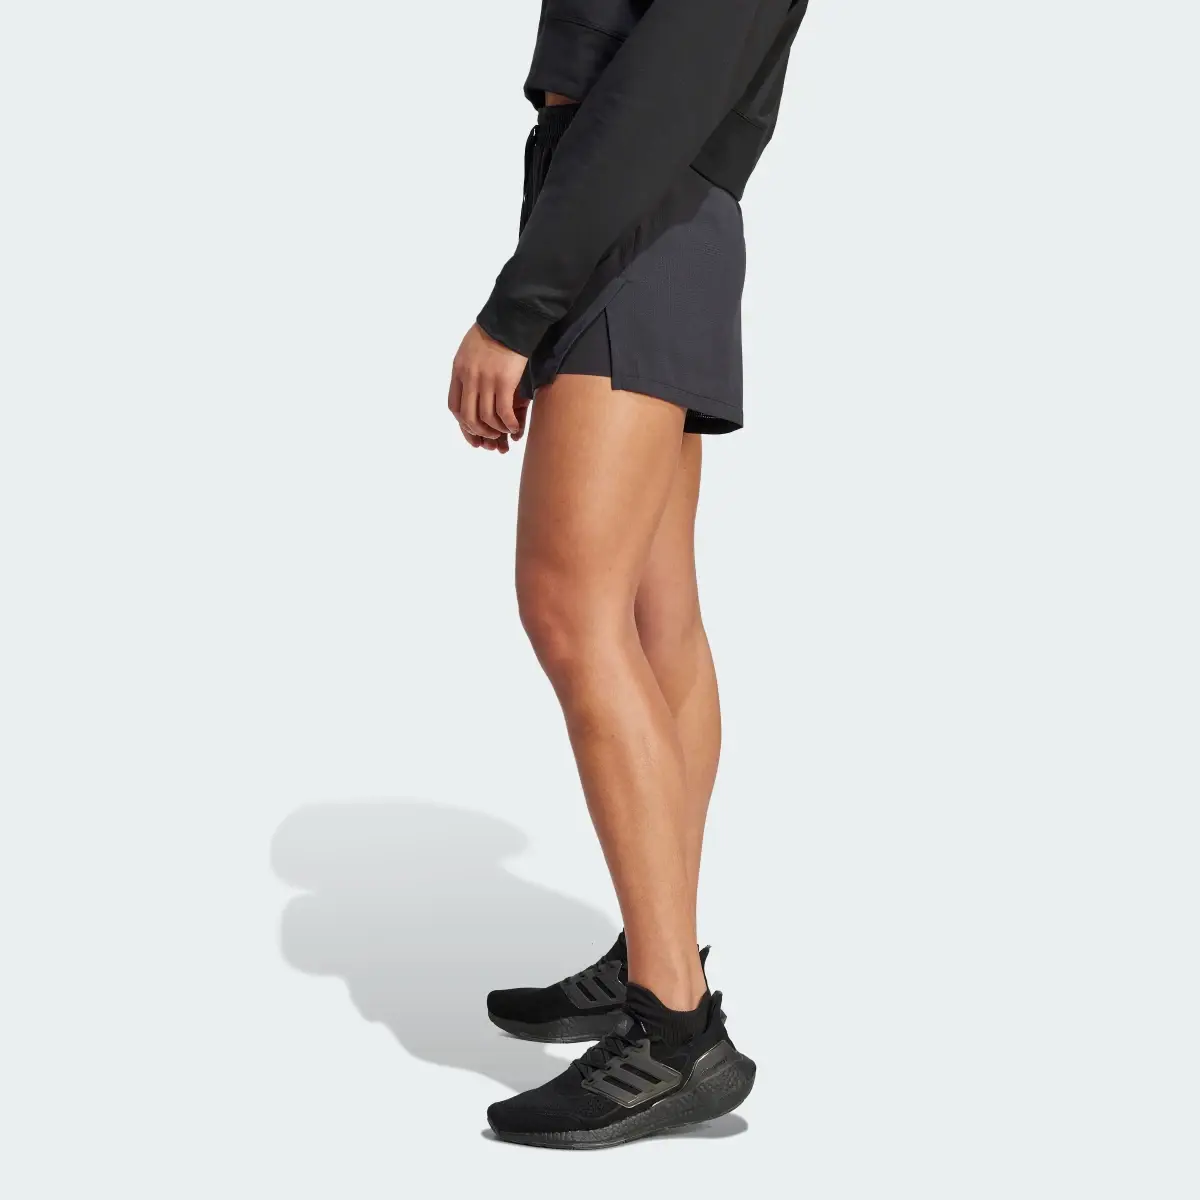 Adidas HIIT HEAT.RDY Two-in-One Shorts. 2